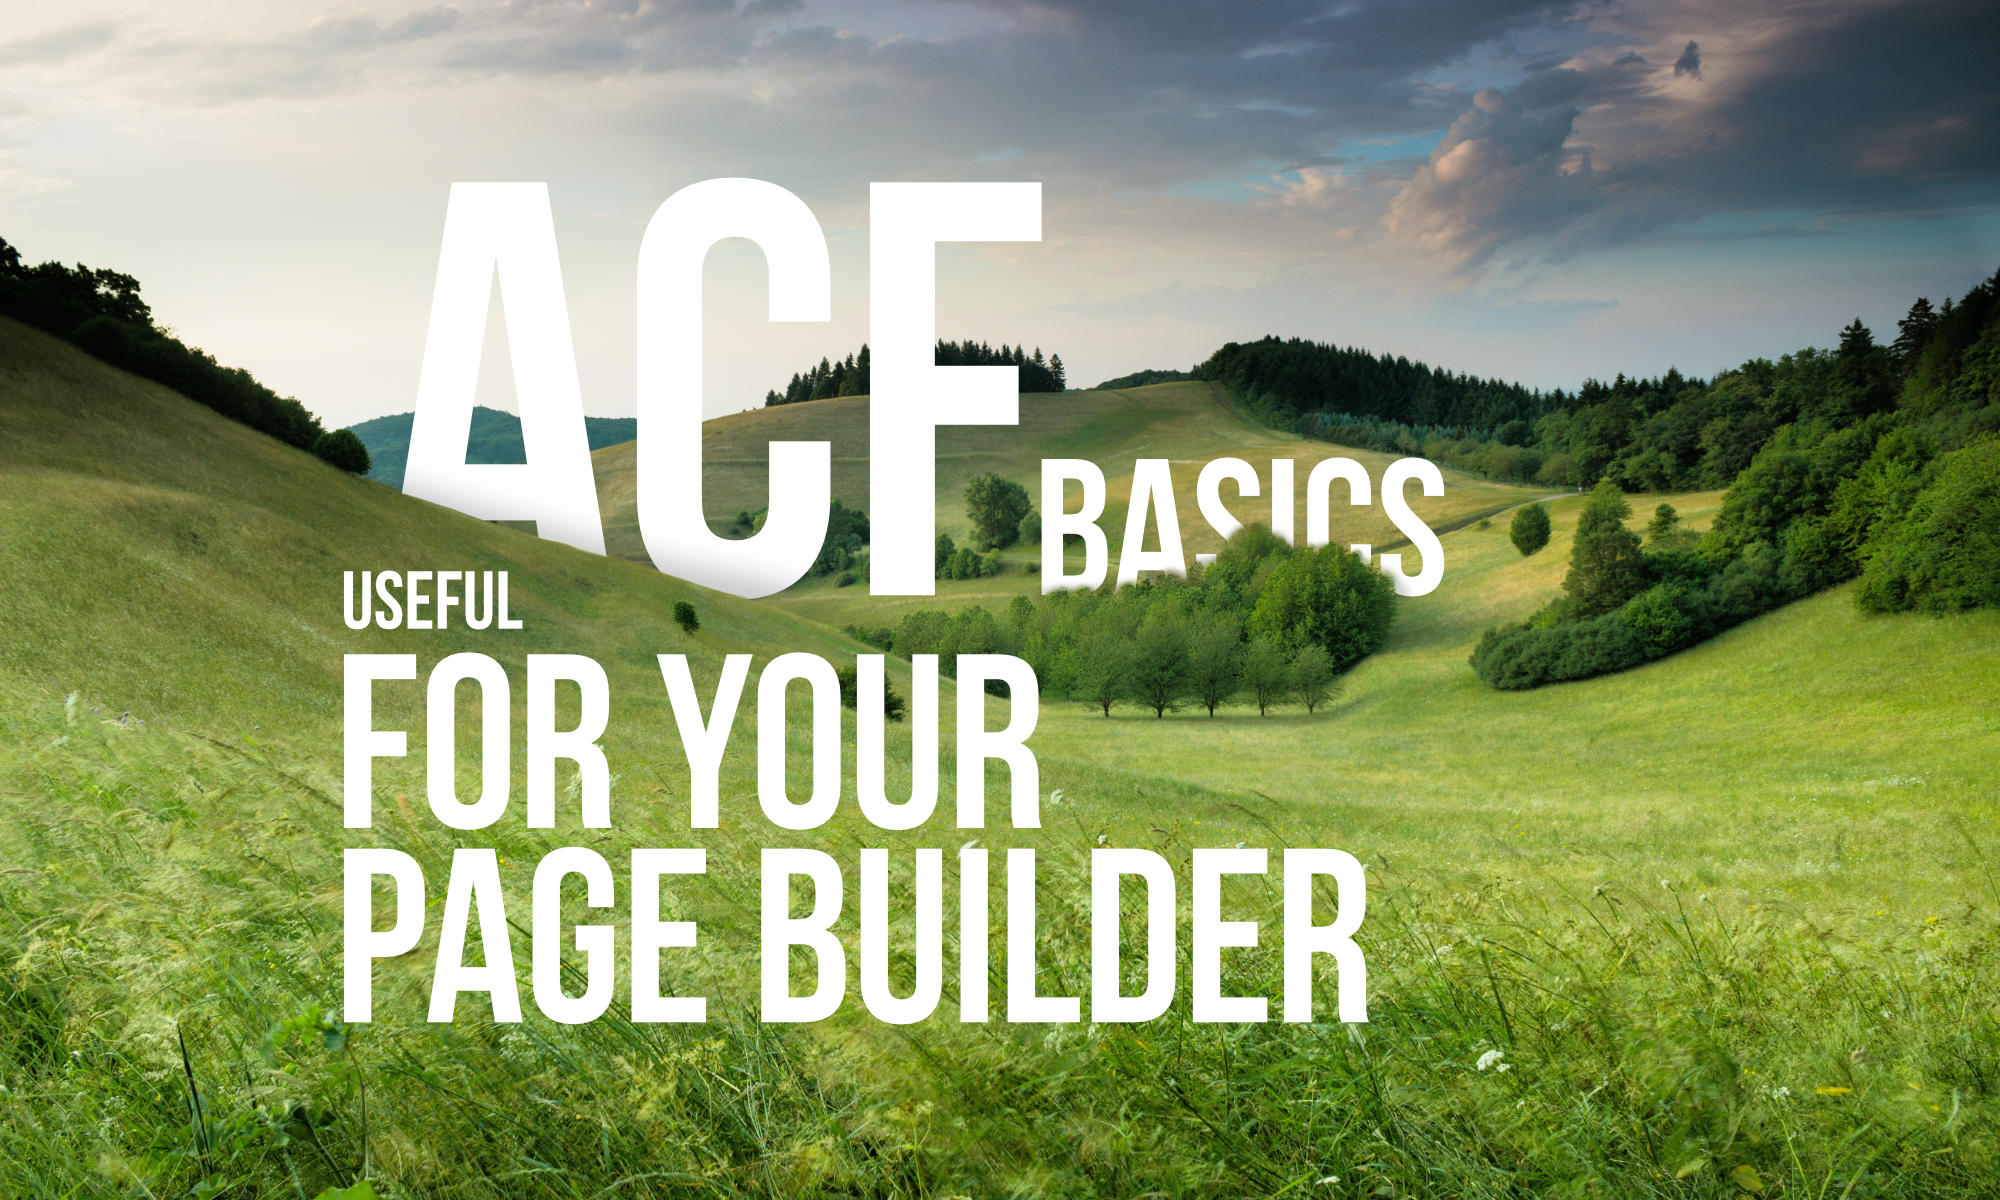 Useful ACF basics with your page builder